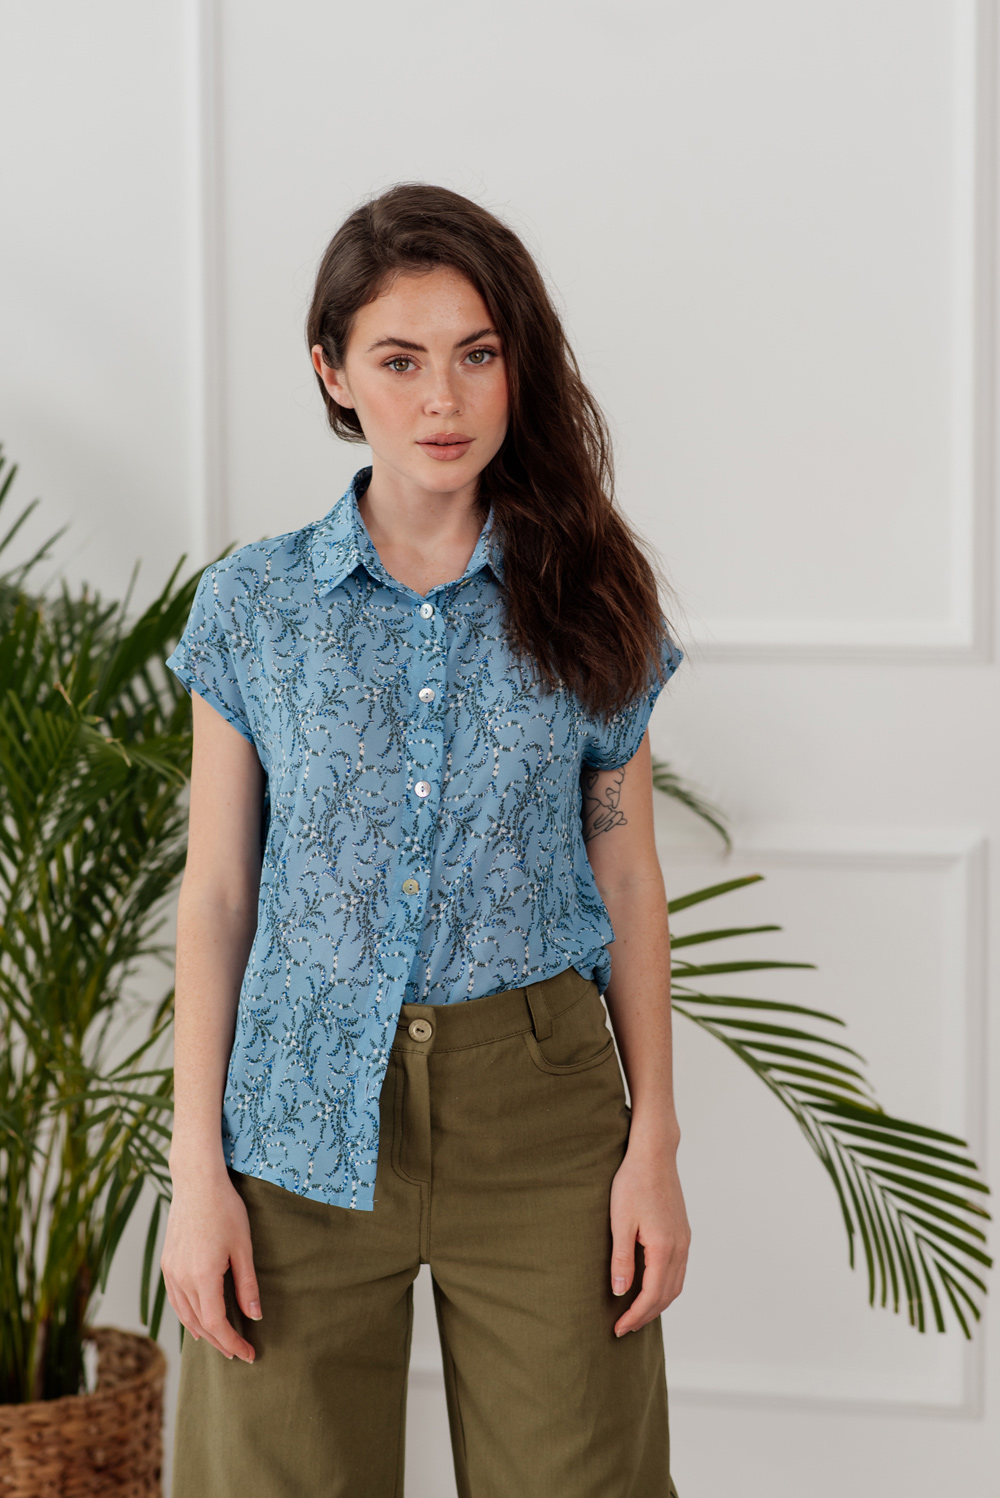 Blue chiffon blouse in floral print